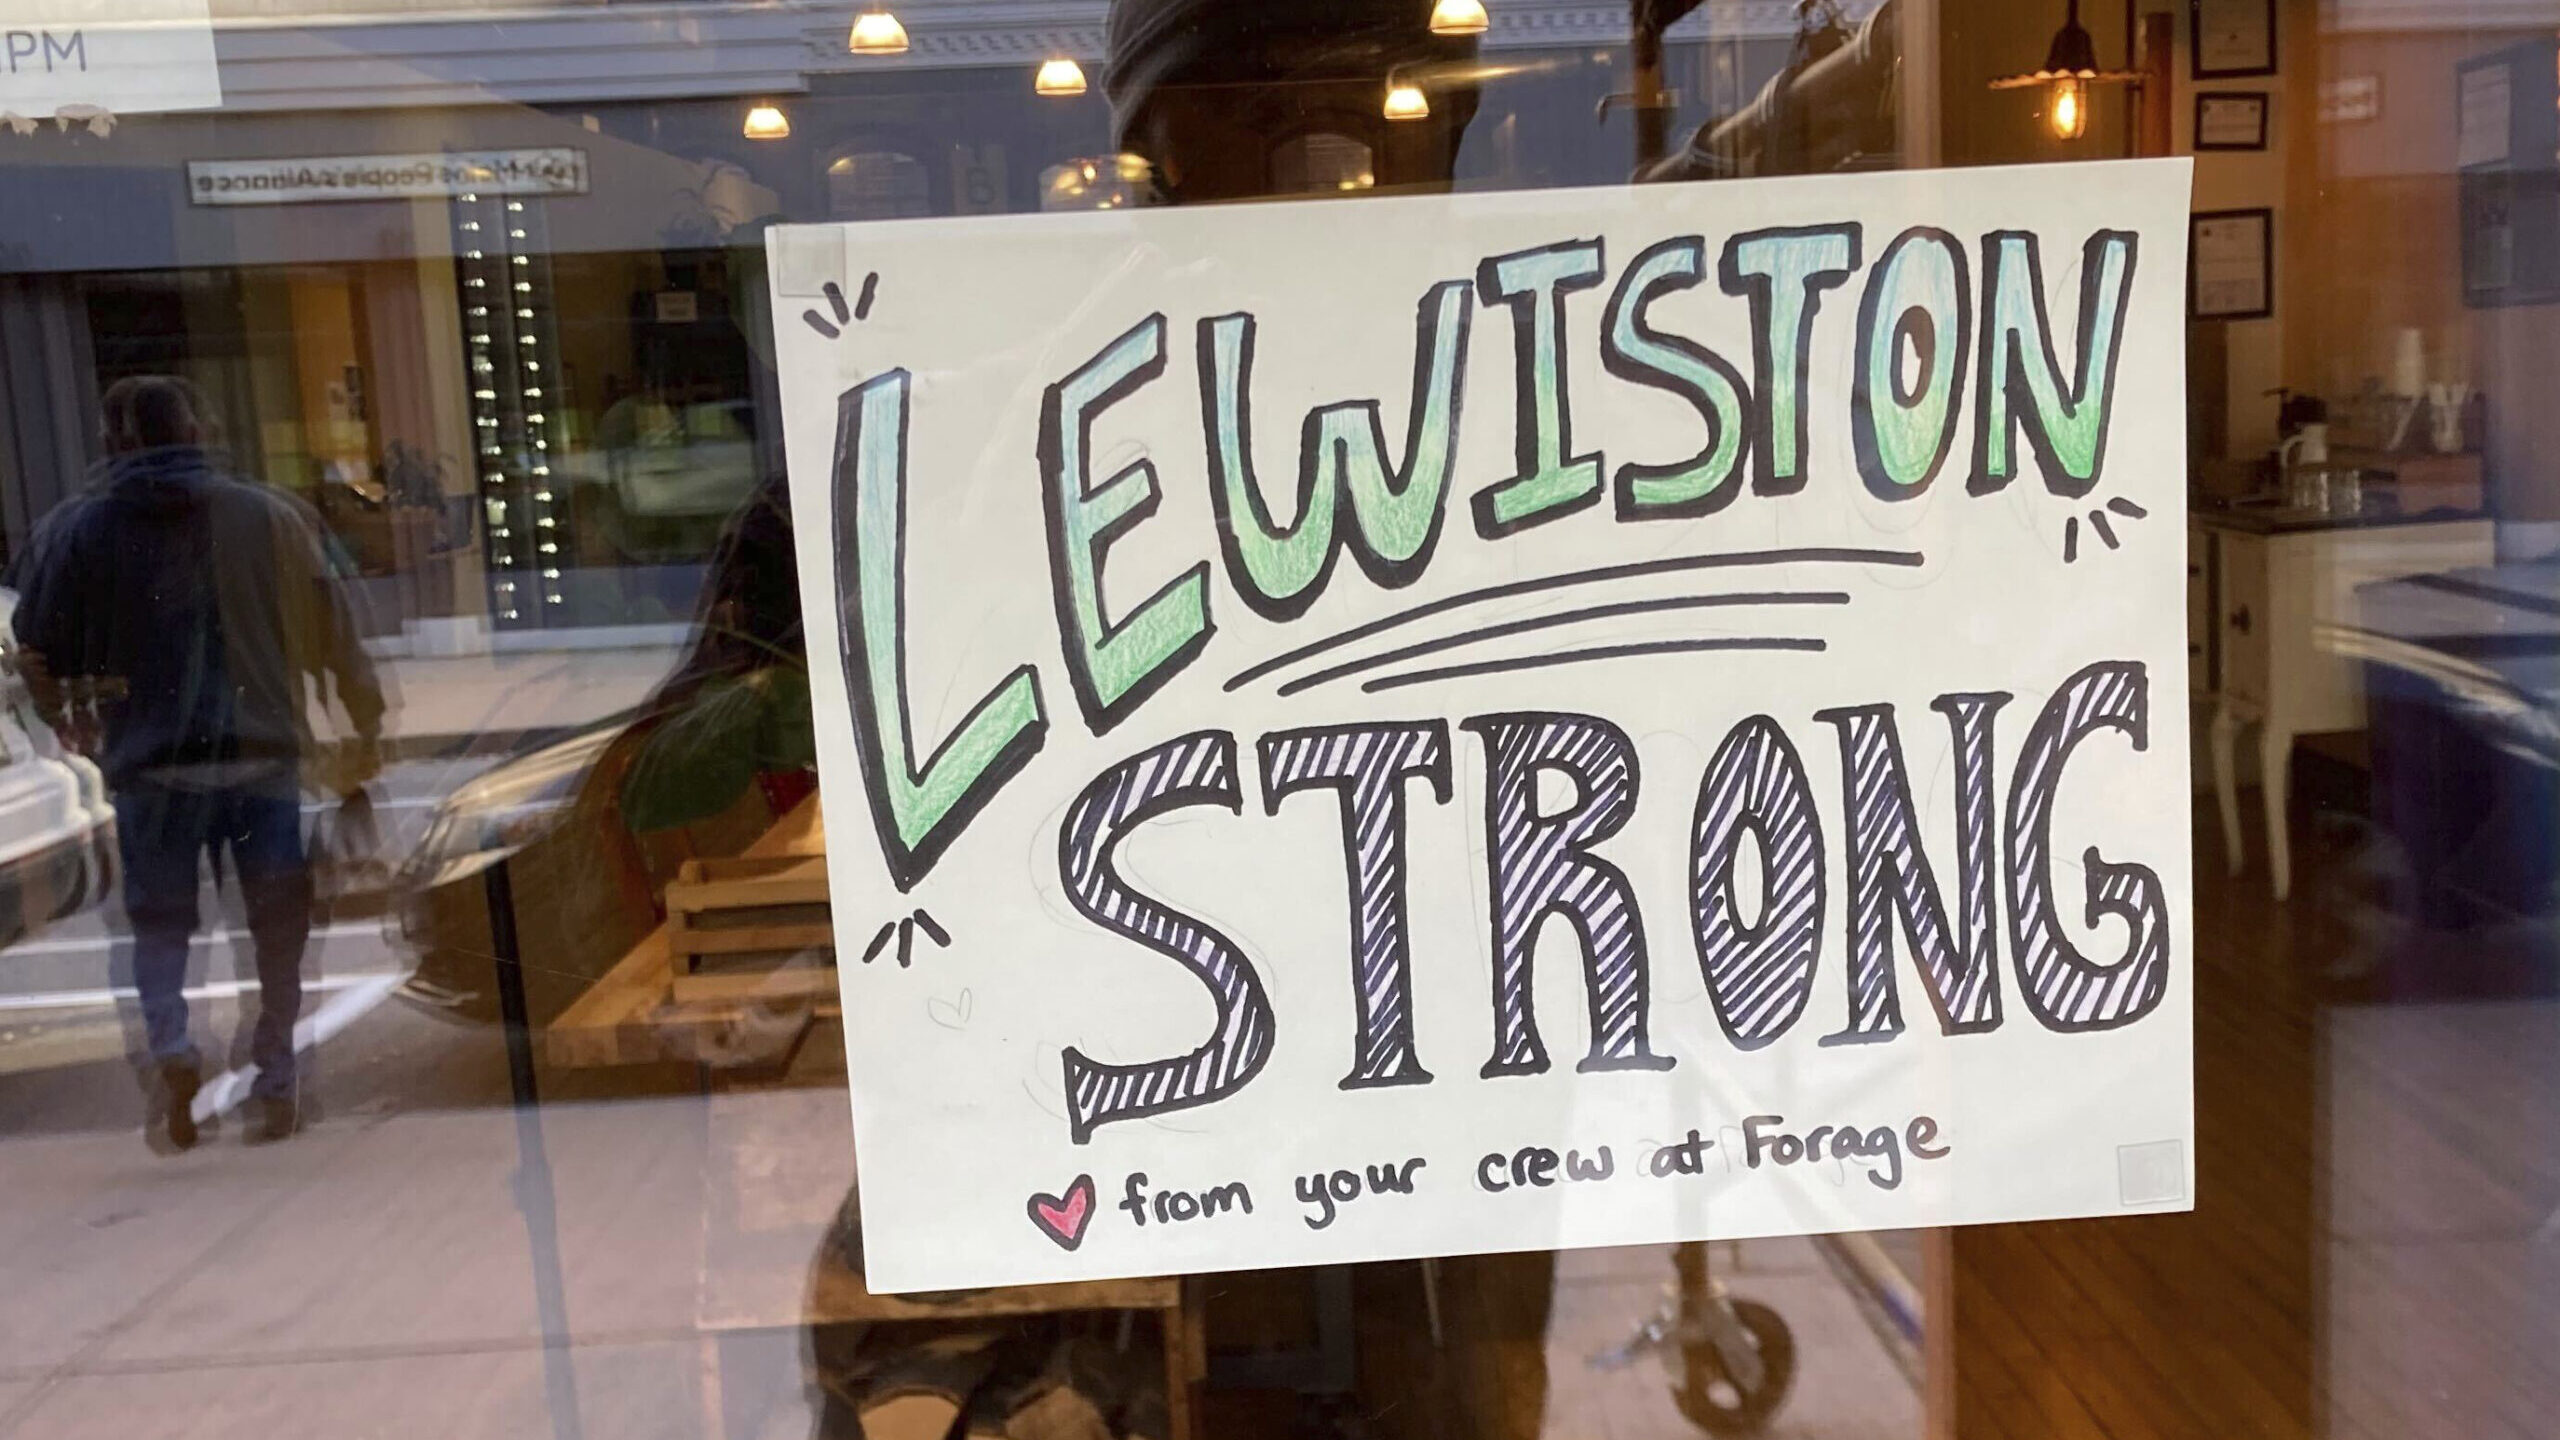 lewiston strong sign hung up in window...